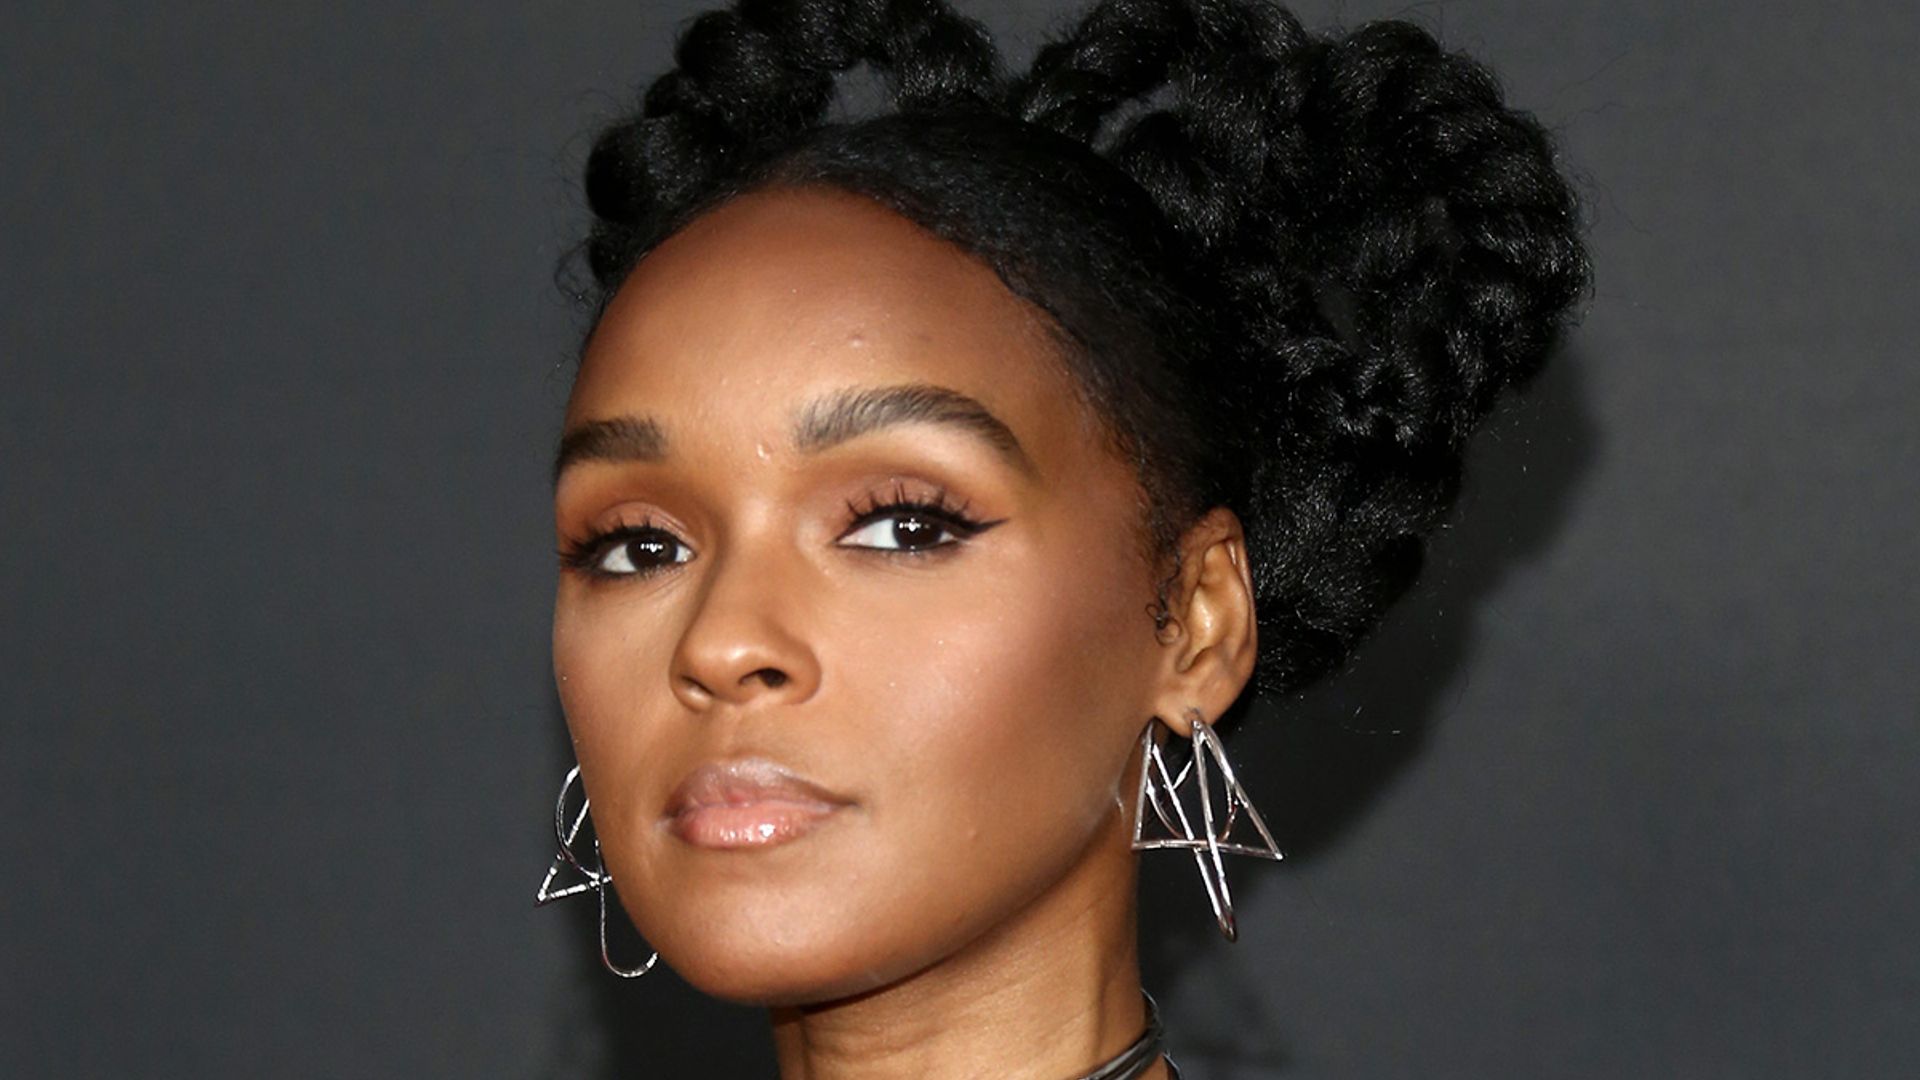 Janelle Monae is glistening in one of her most glamorous looks ever